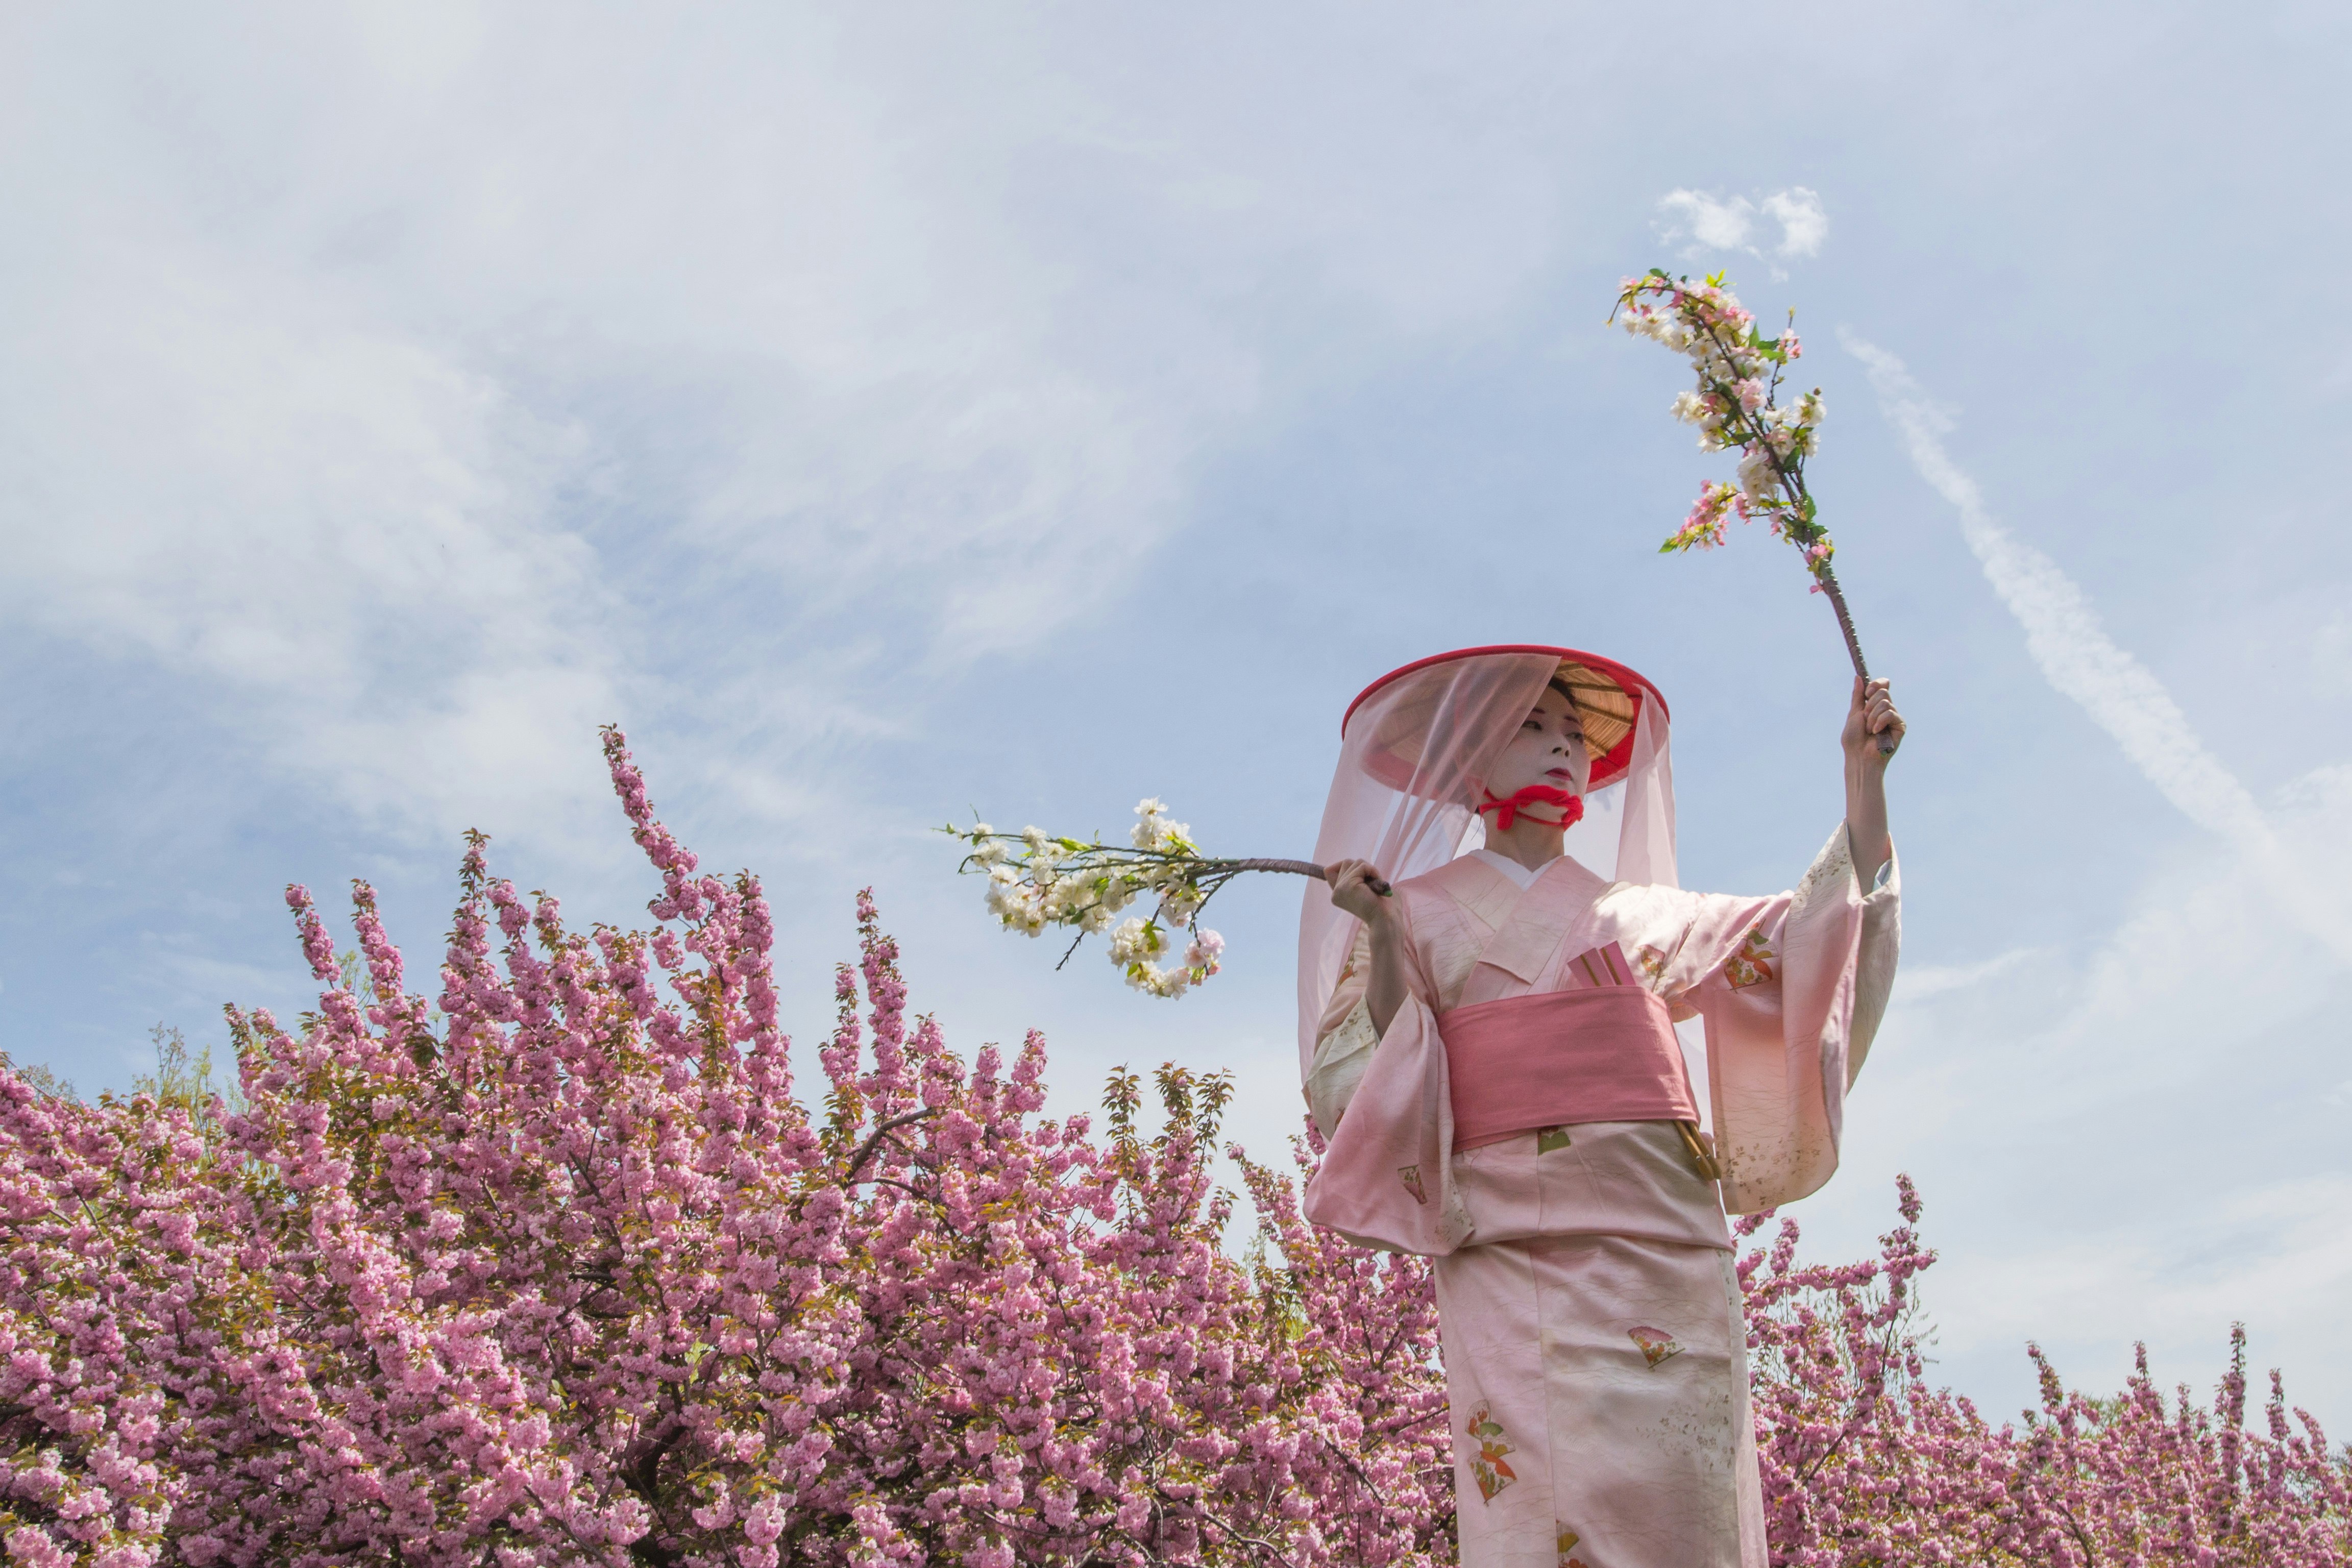 A woman in traditional Japanese dress stands in front of pink cherry blossoms